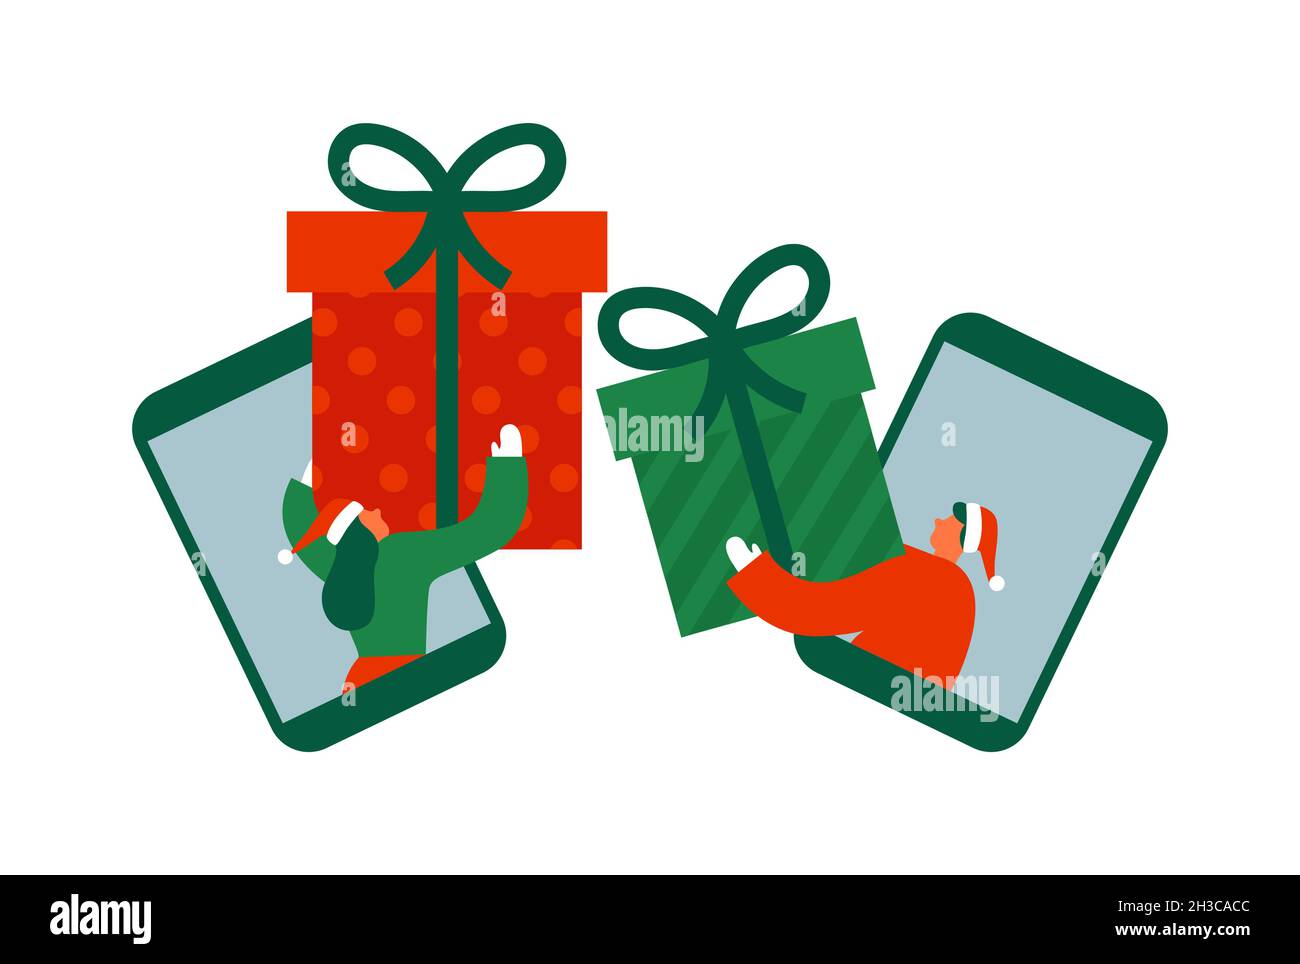 Man and woman friends swapping christmas gifts on mobile phone. Isolated white background illustration in modern flat cartoon style for online friends Stock Vector